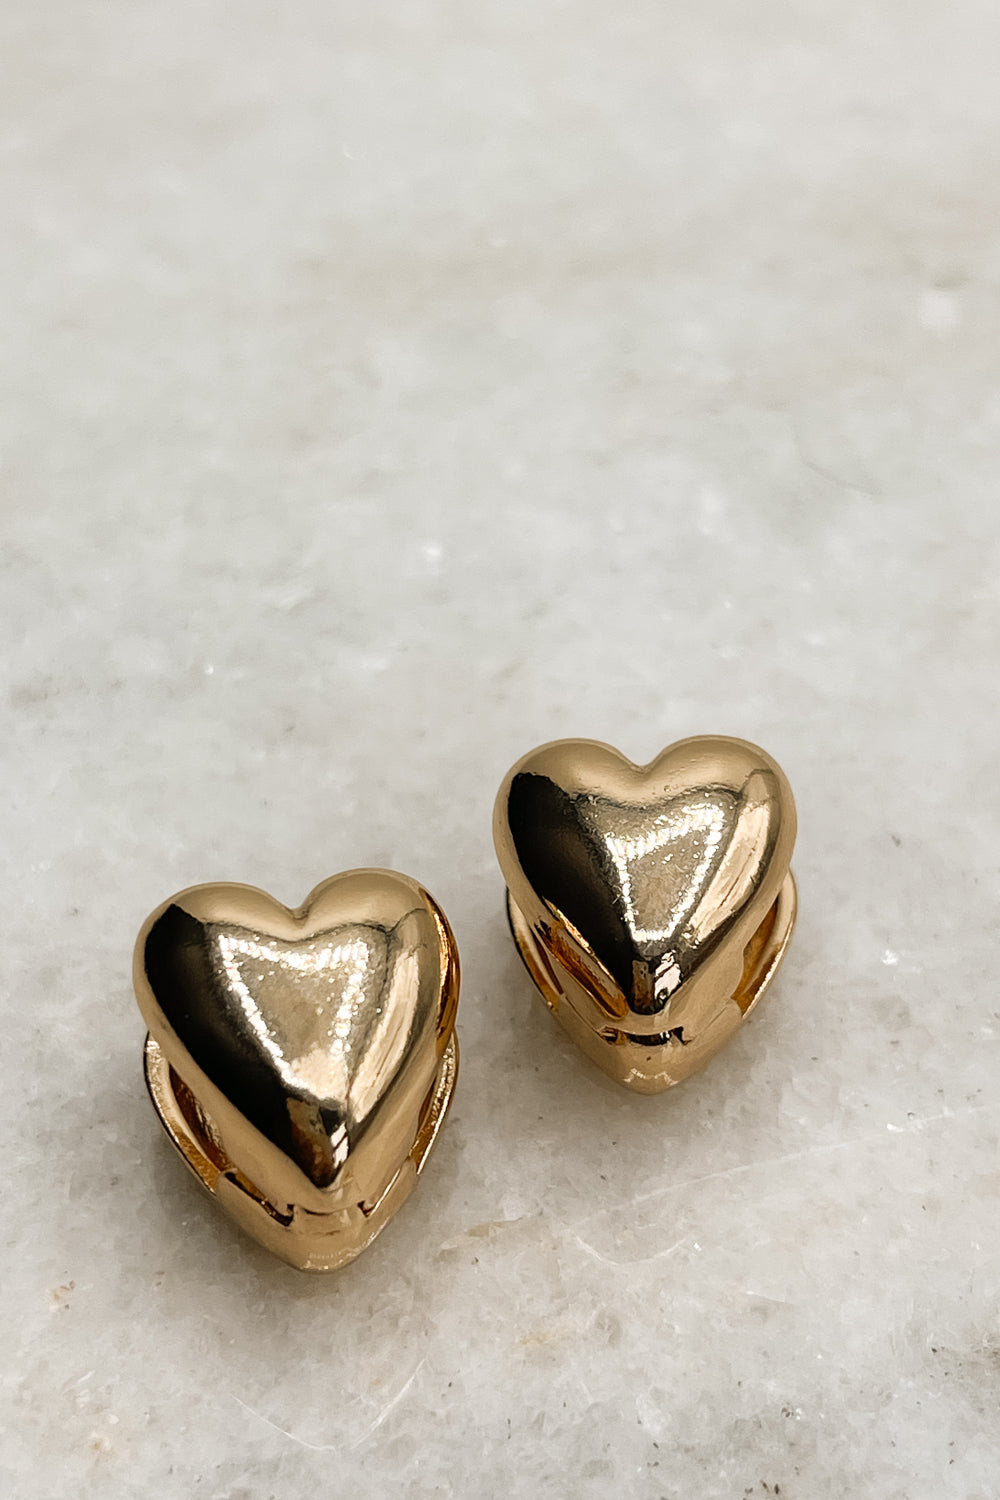 The Raine Earrings are shown against a neutral background. They are gold heart-shaped studs.